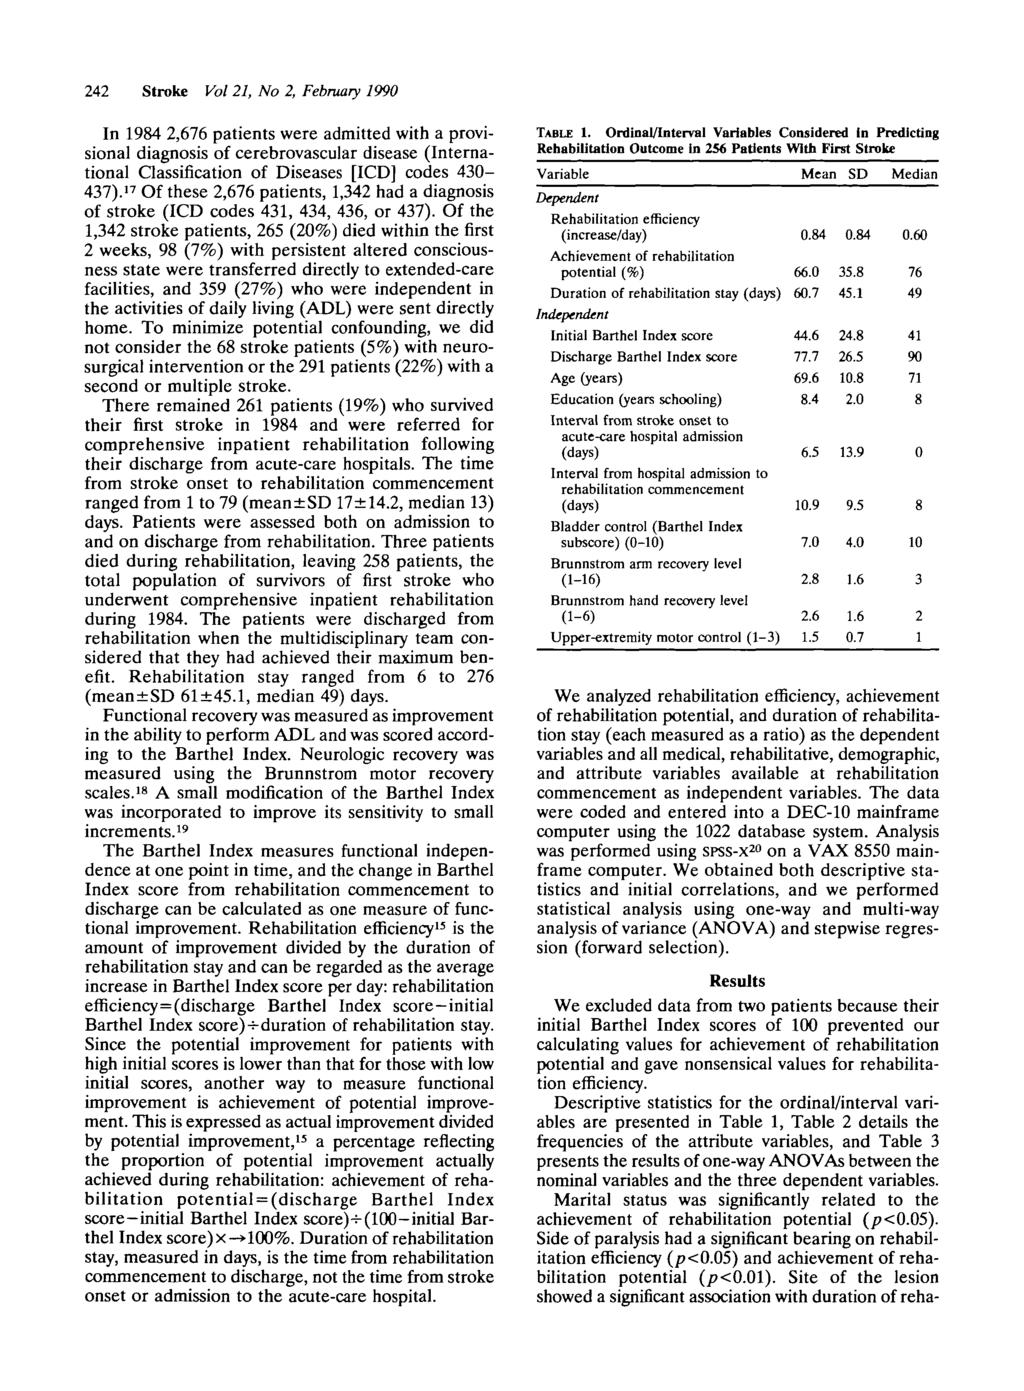 242 Stroke Vol 21, No 2, February 1990 In 1984 2,676 patients were admitted with a provisional diagnosis of cerebrovascular disease (International Classification of Diseases [ICD] codes 430-437).